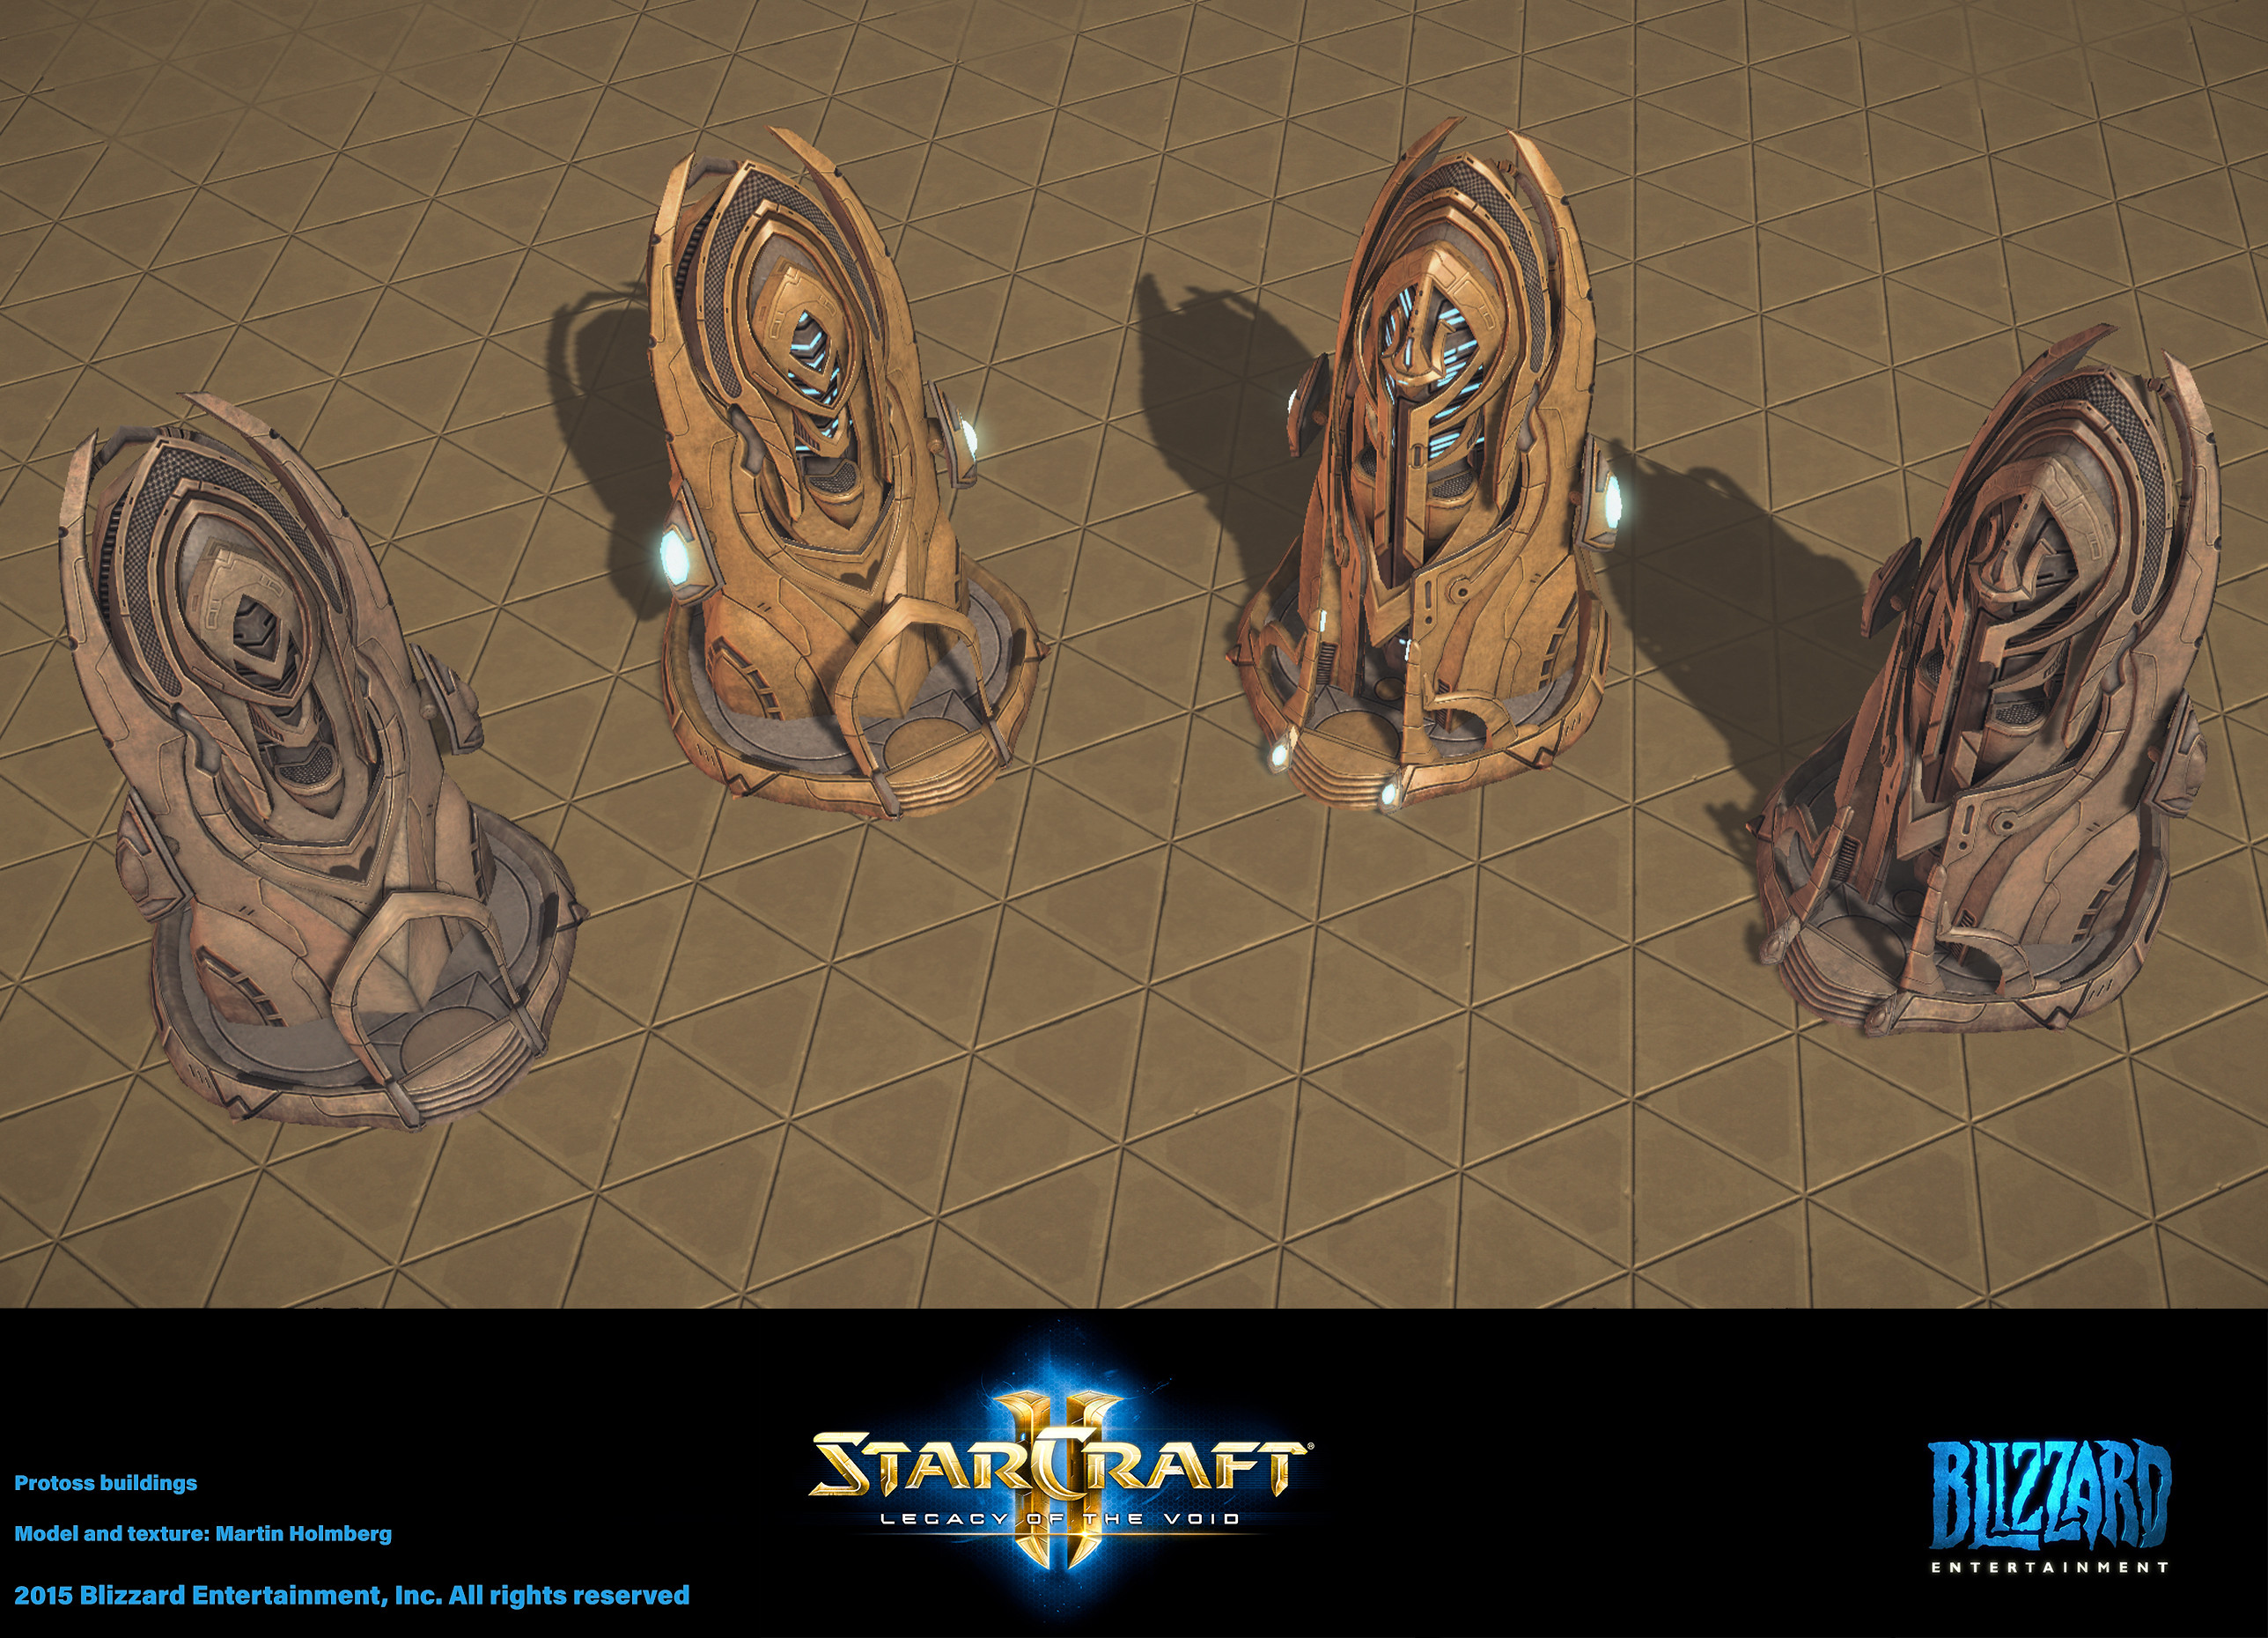 protoss buildings.
These ones were later reskinned to fit with other protoss factions like cybros